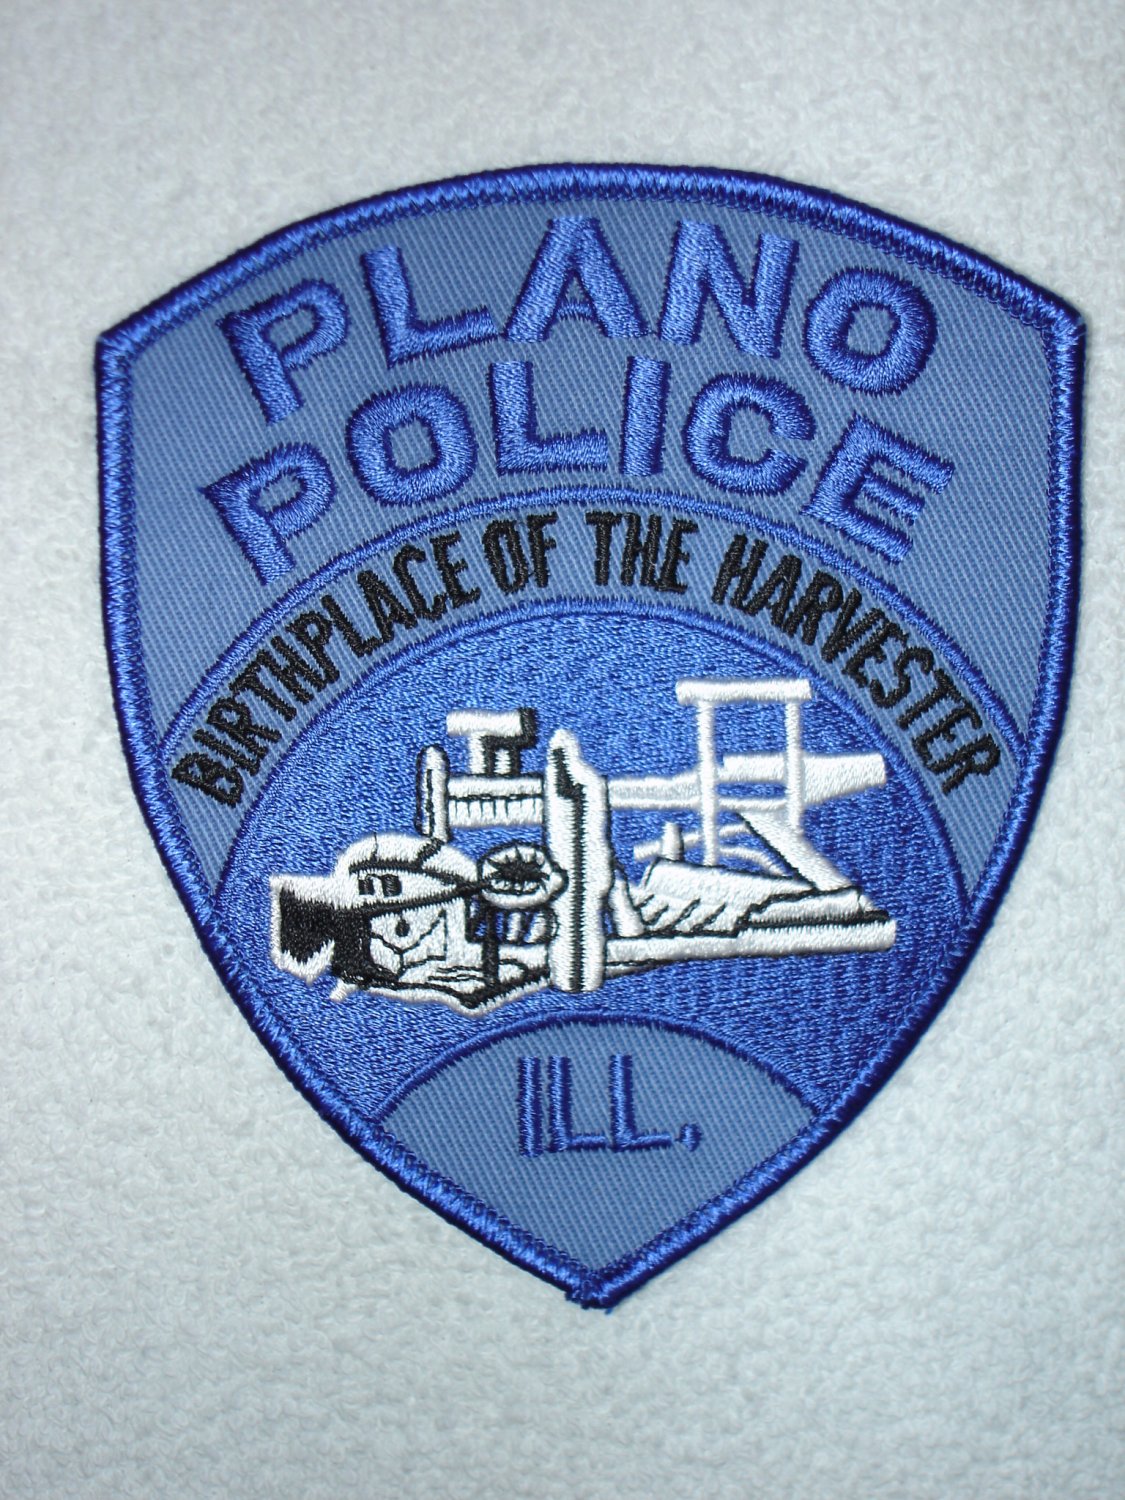 Plano Police Department patch